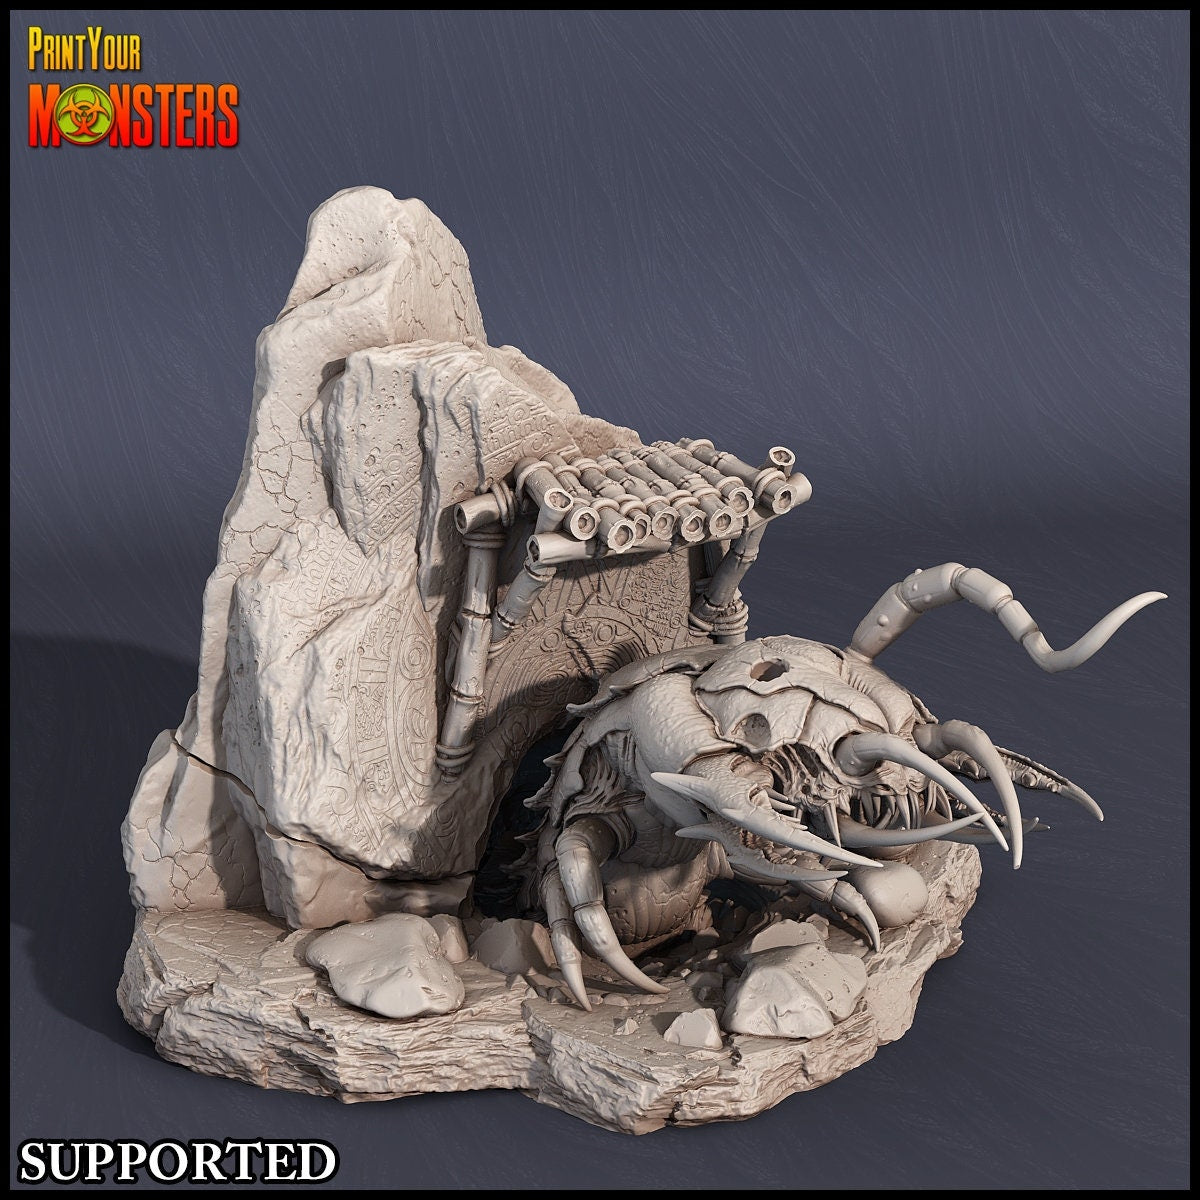 Giant Centipede in Cave - Print Your Monsters 